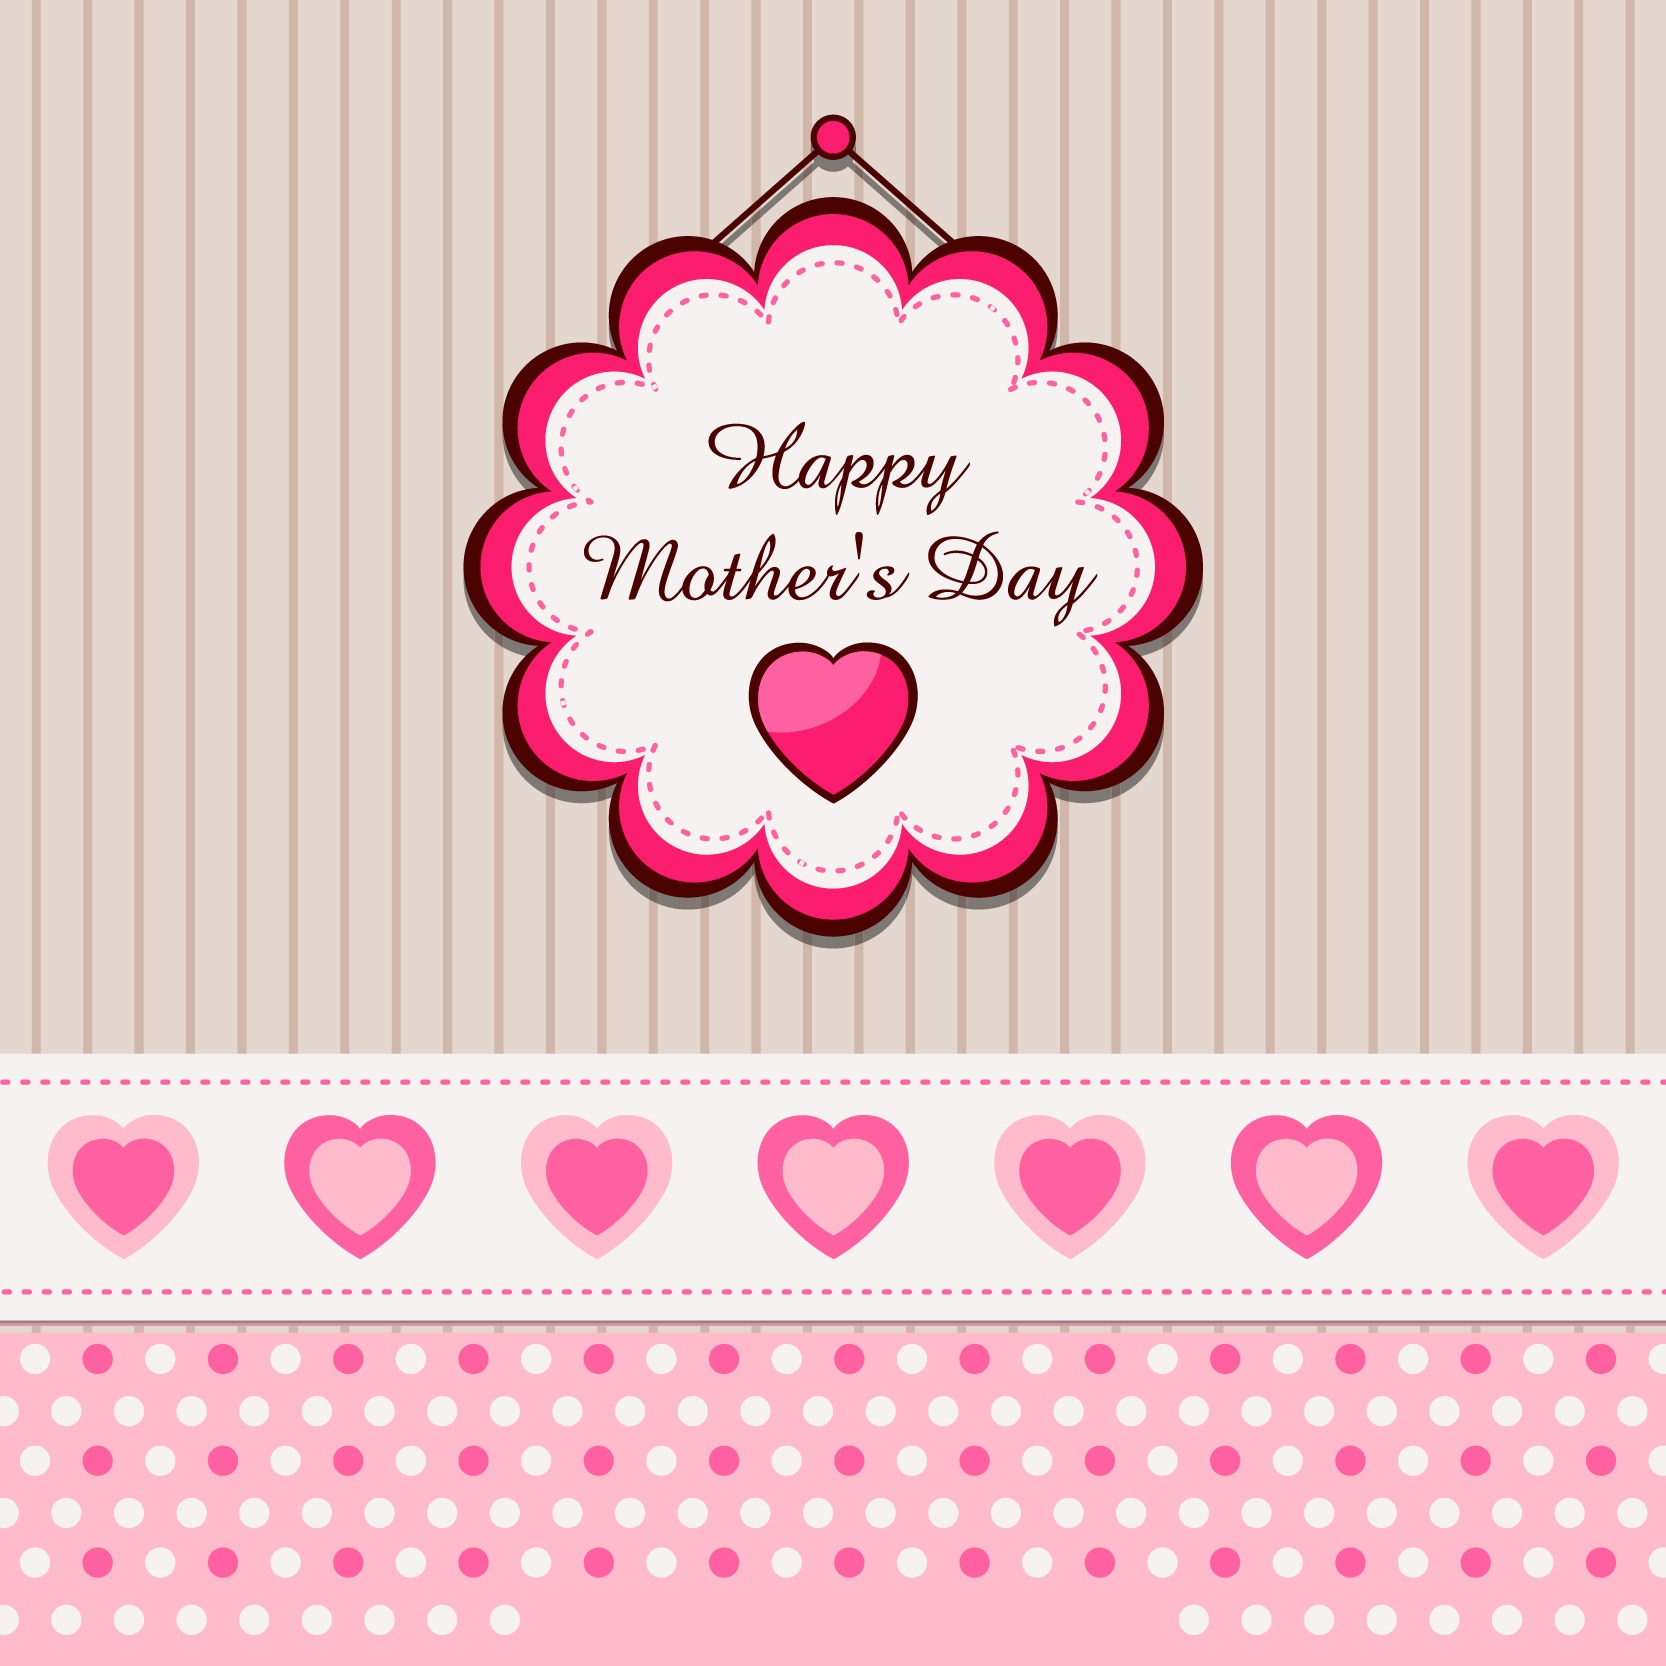 Mother's Day Images for Whatsapp